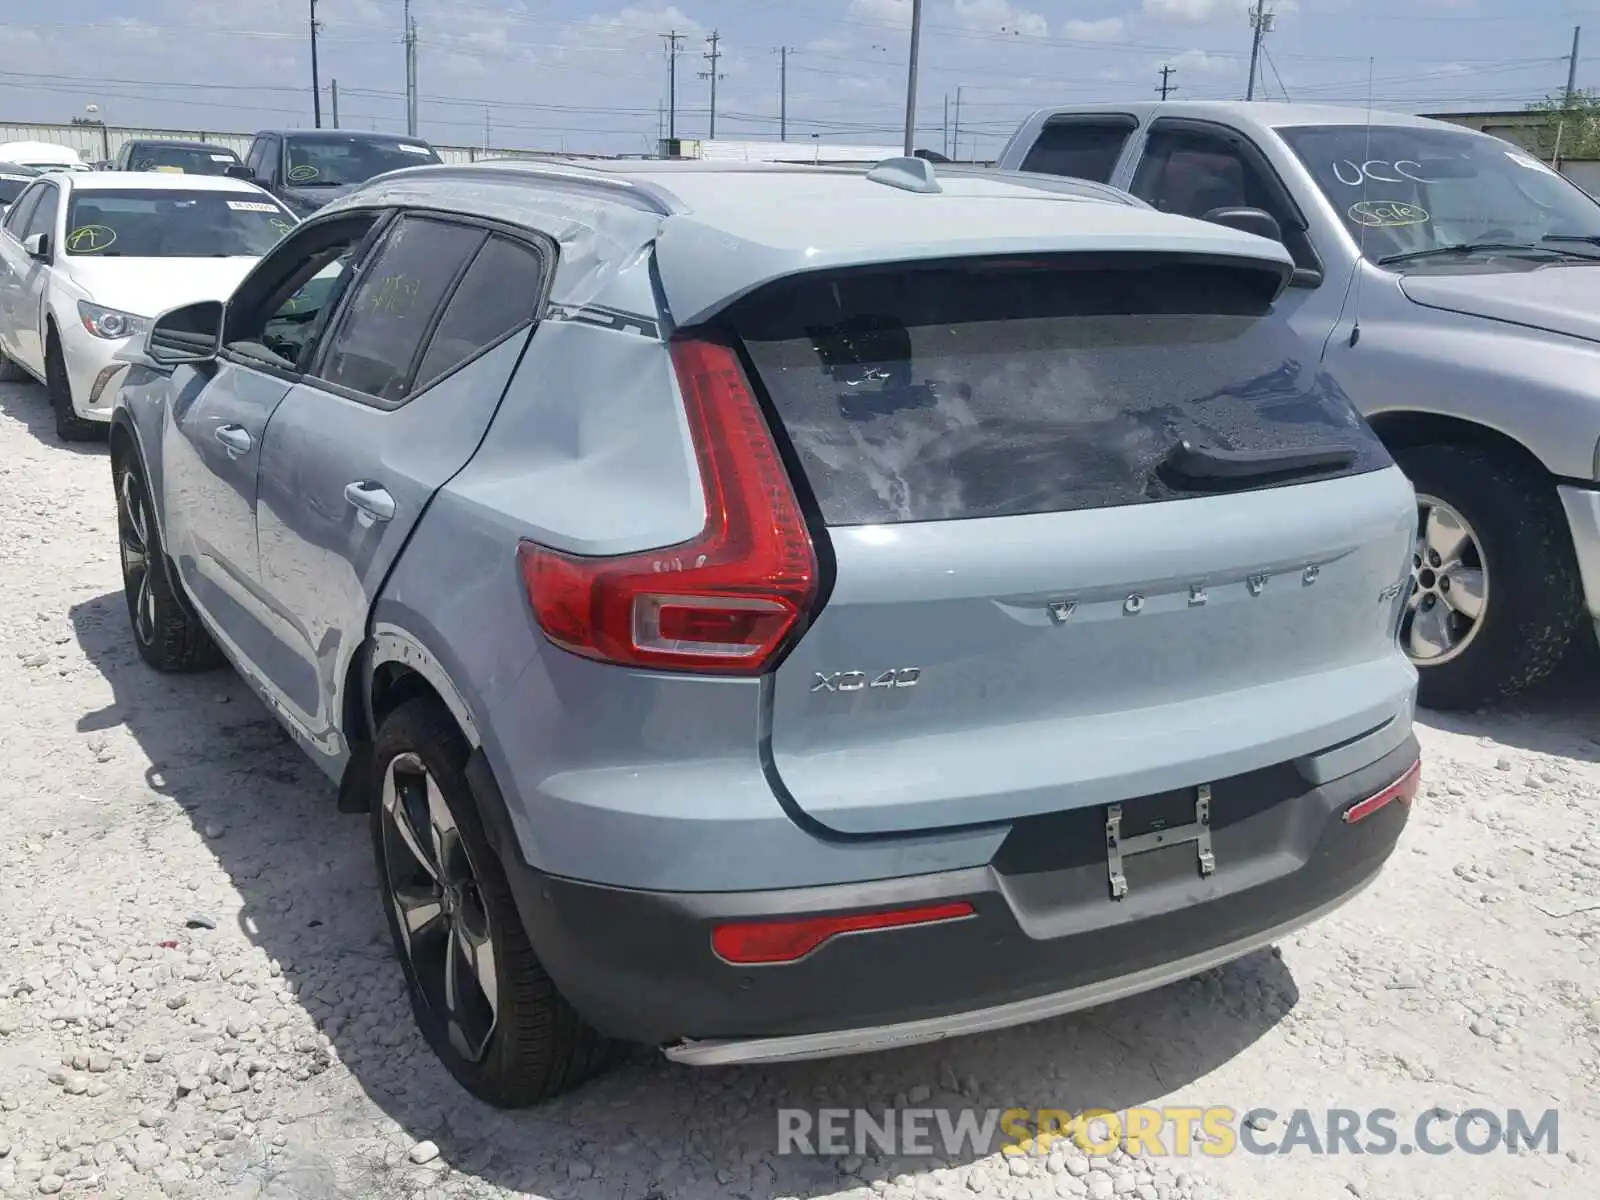 3 Photograph of a damaged car YV4162UK8K2090156 VOLVO XC40 T5 2019